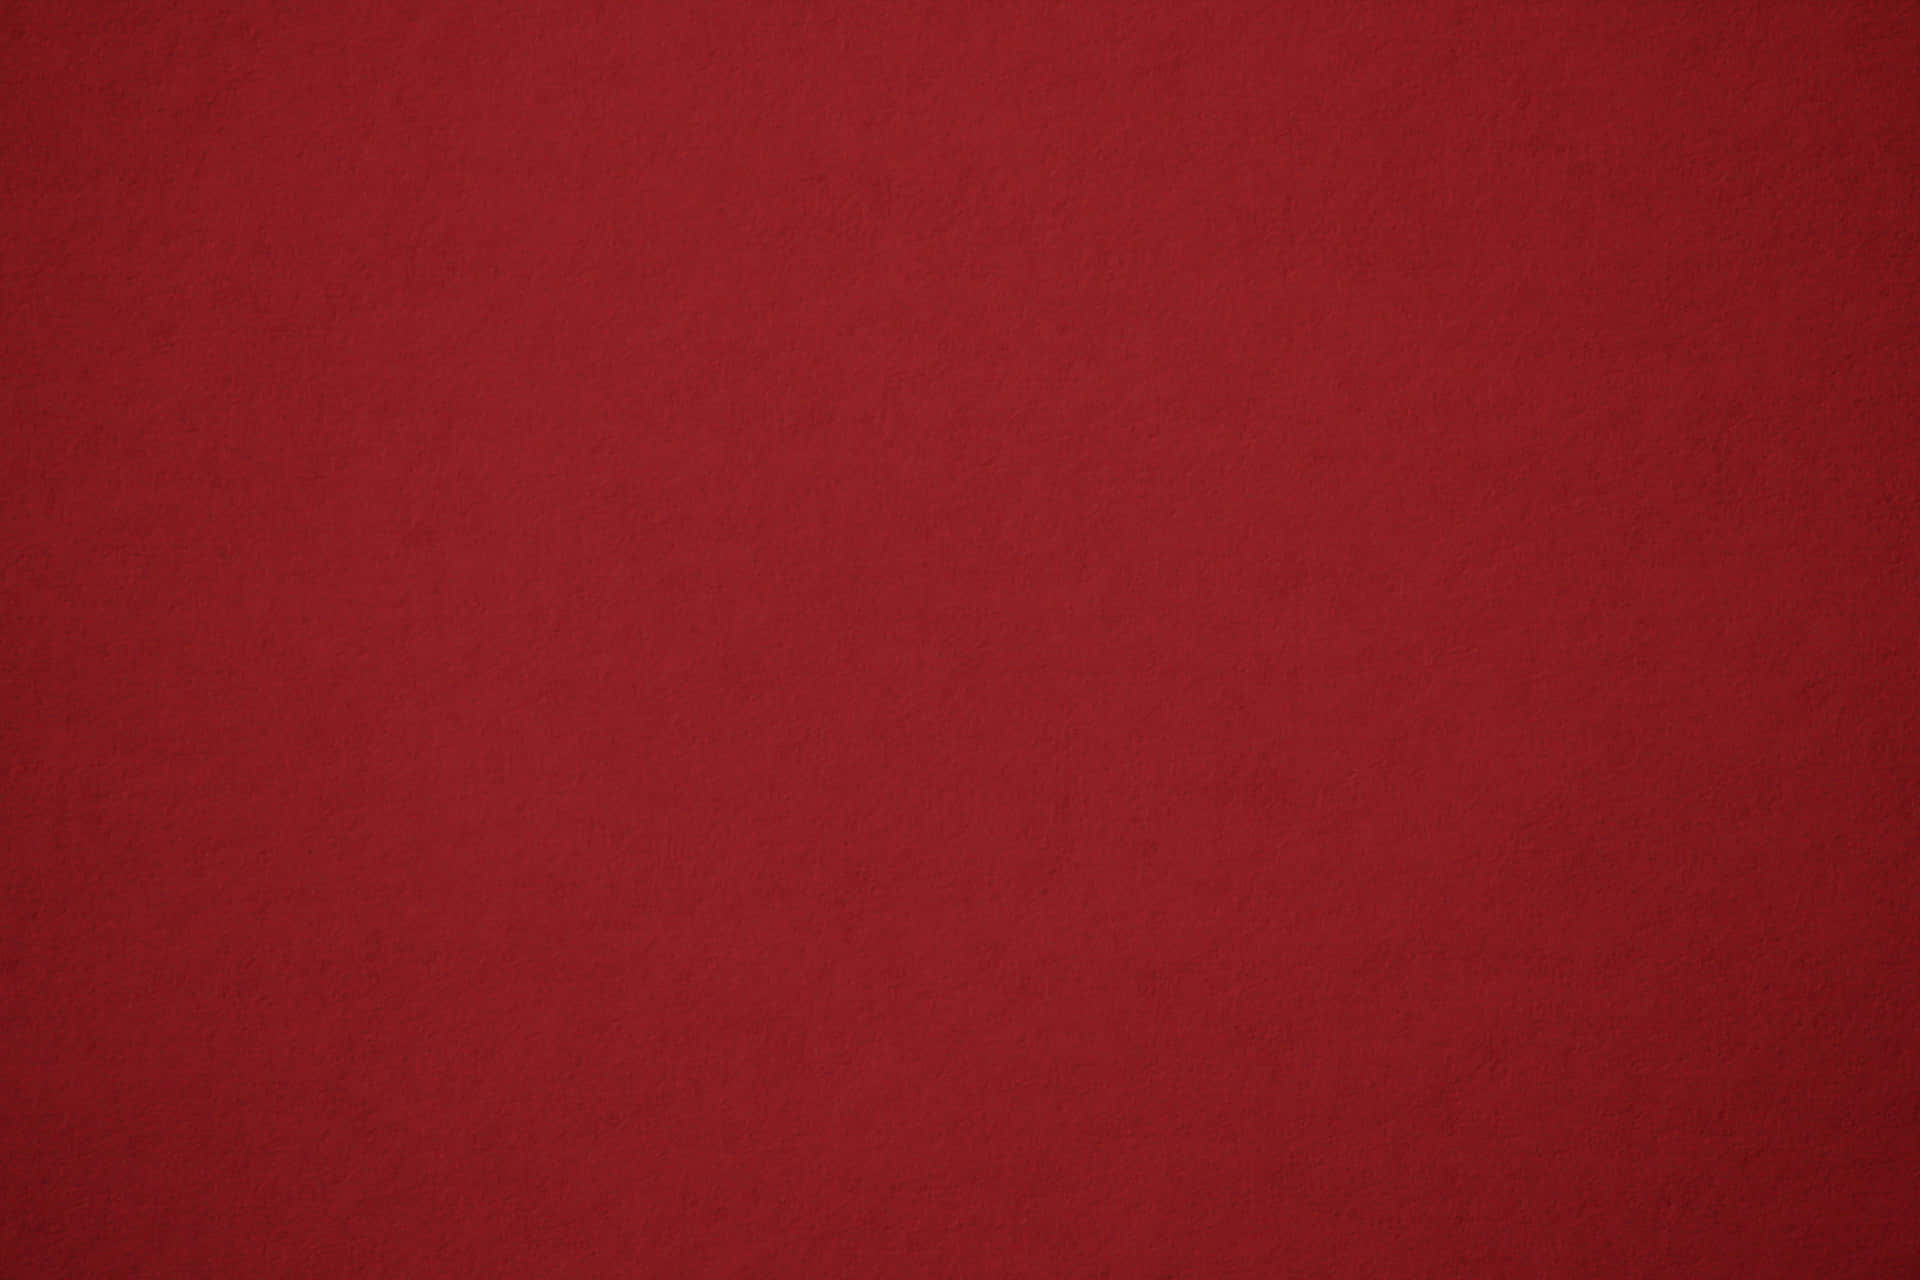 Red Texture Plain Red Background Picture